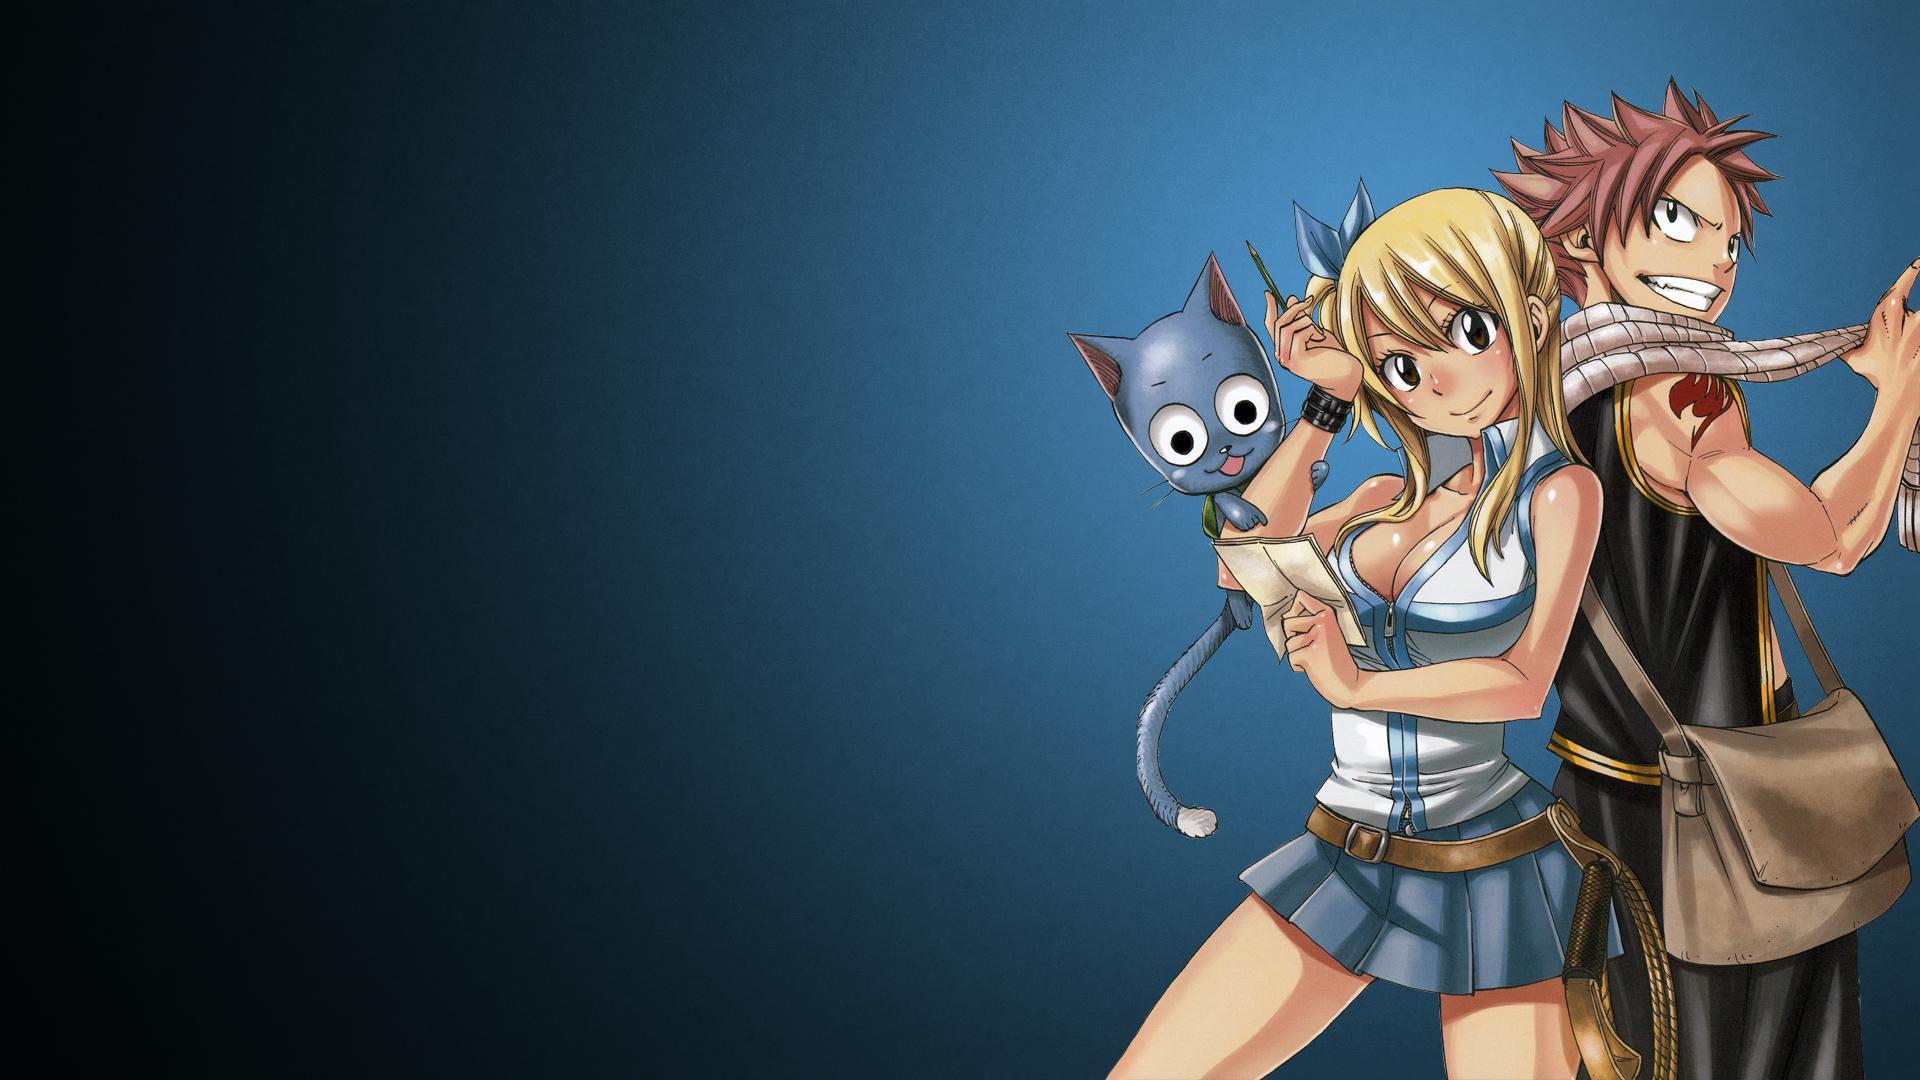 Nalu Fairy Tail Wallpapers - Top Free Nalu Fairy Tail Backgrounds